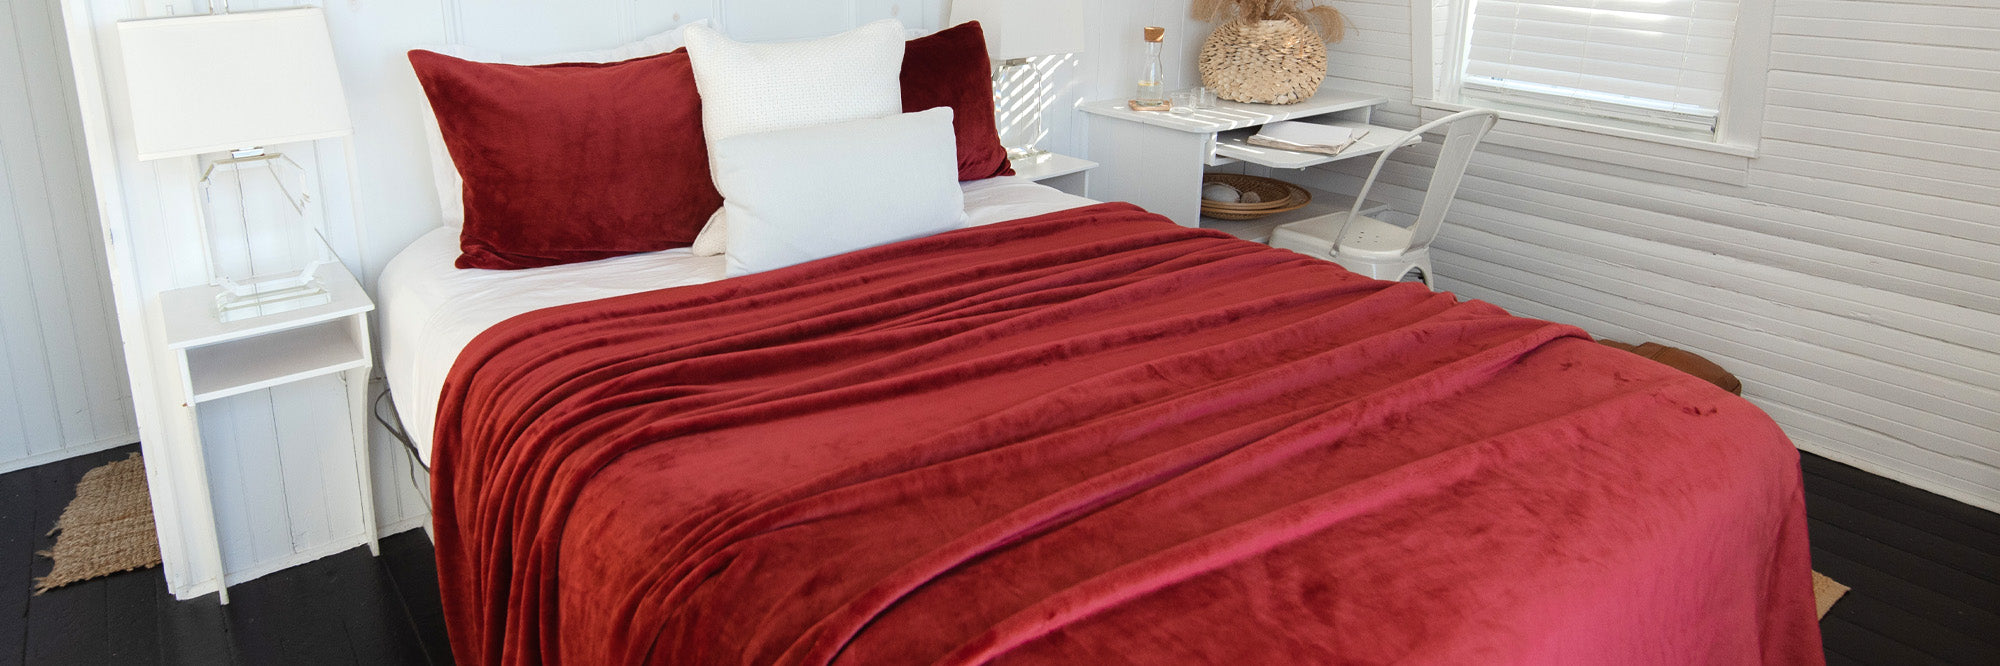 Luster Loft Fleece Blankets - A bed made with a red luster loft fleece blanket in a modern bedroom, American Blanket Company